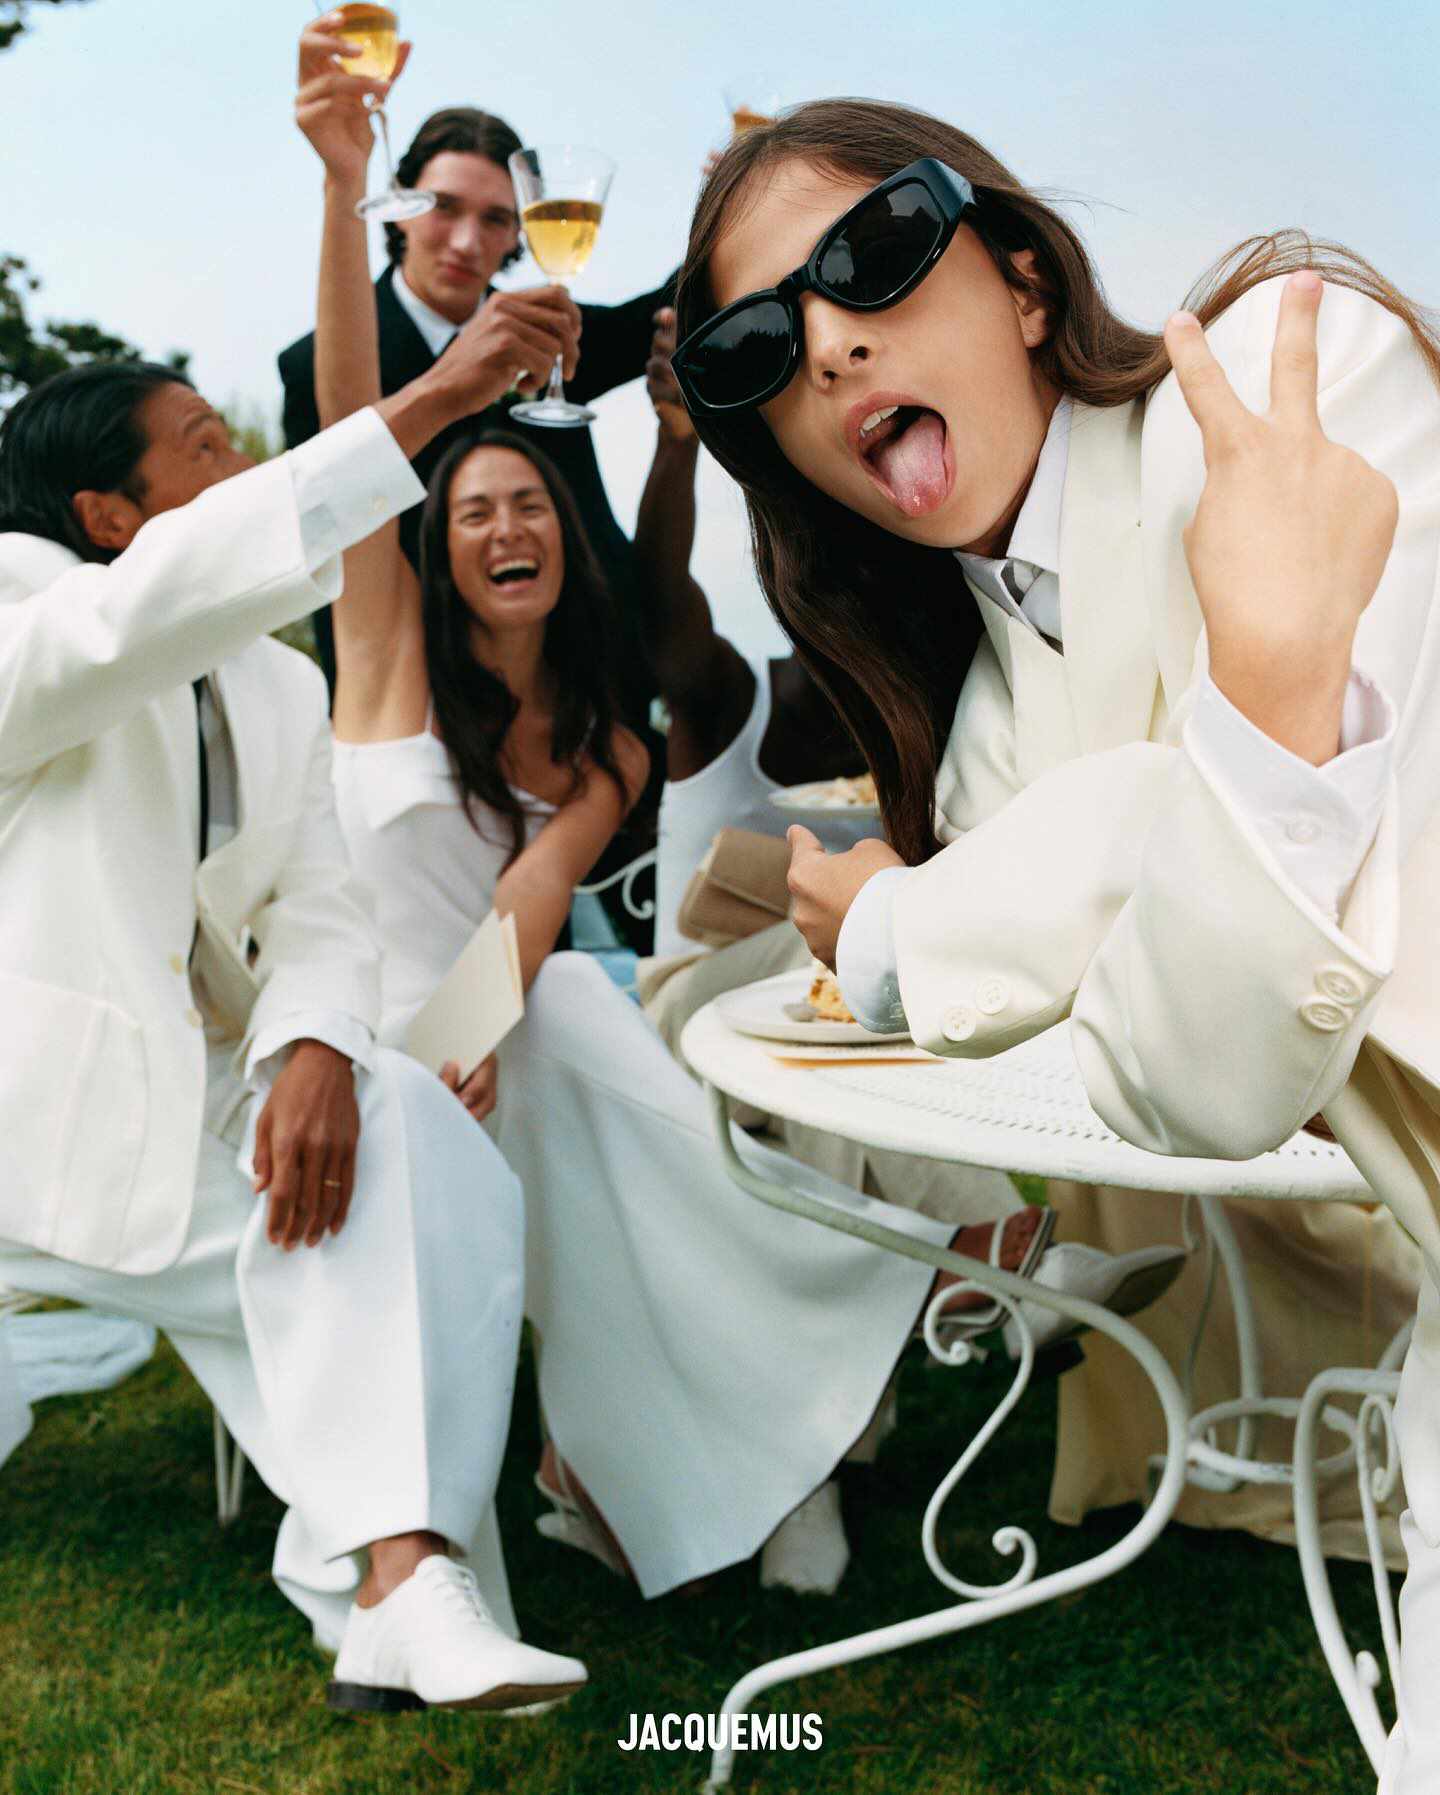 Jacquemus' le marriage wedding clothing collection with white suits, black ties, sunglasses